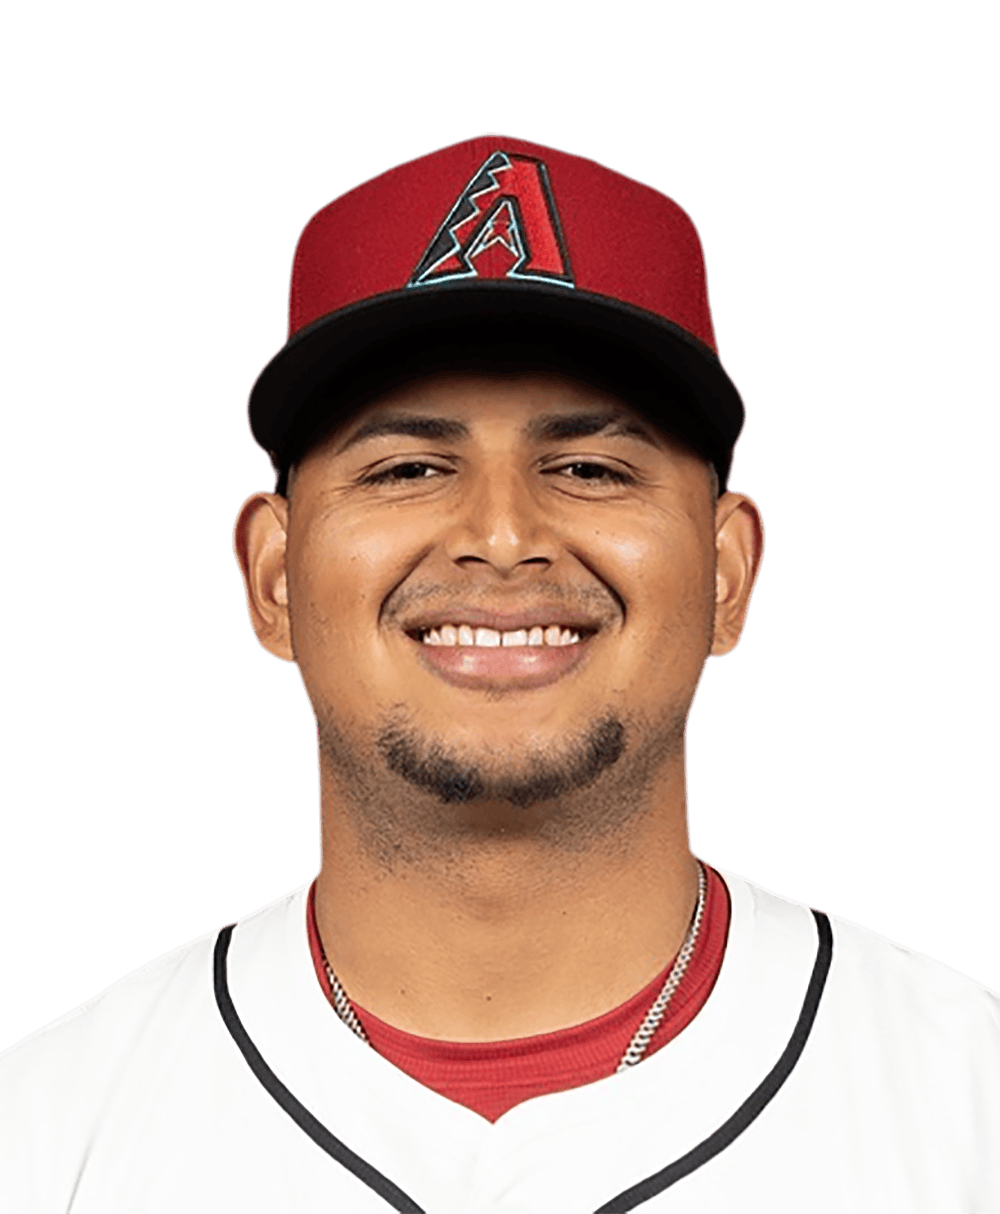 D-backs' Gabriel Moreno says he's ready to play after head injury